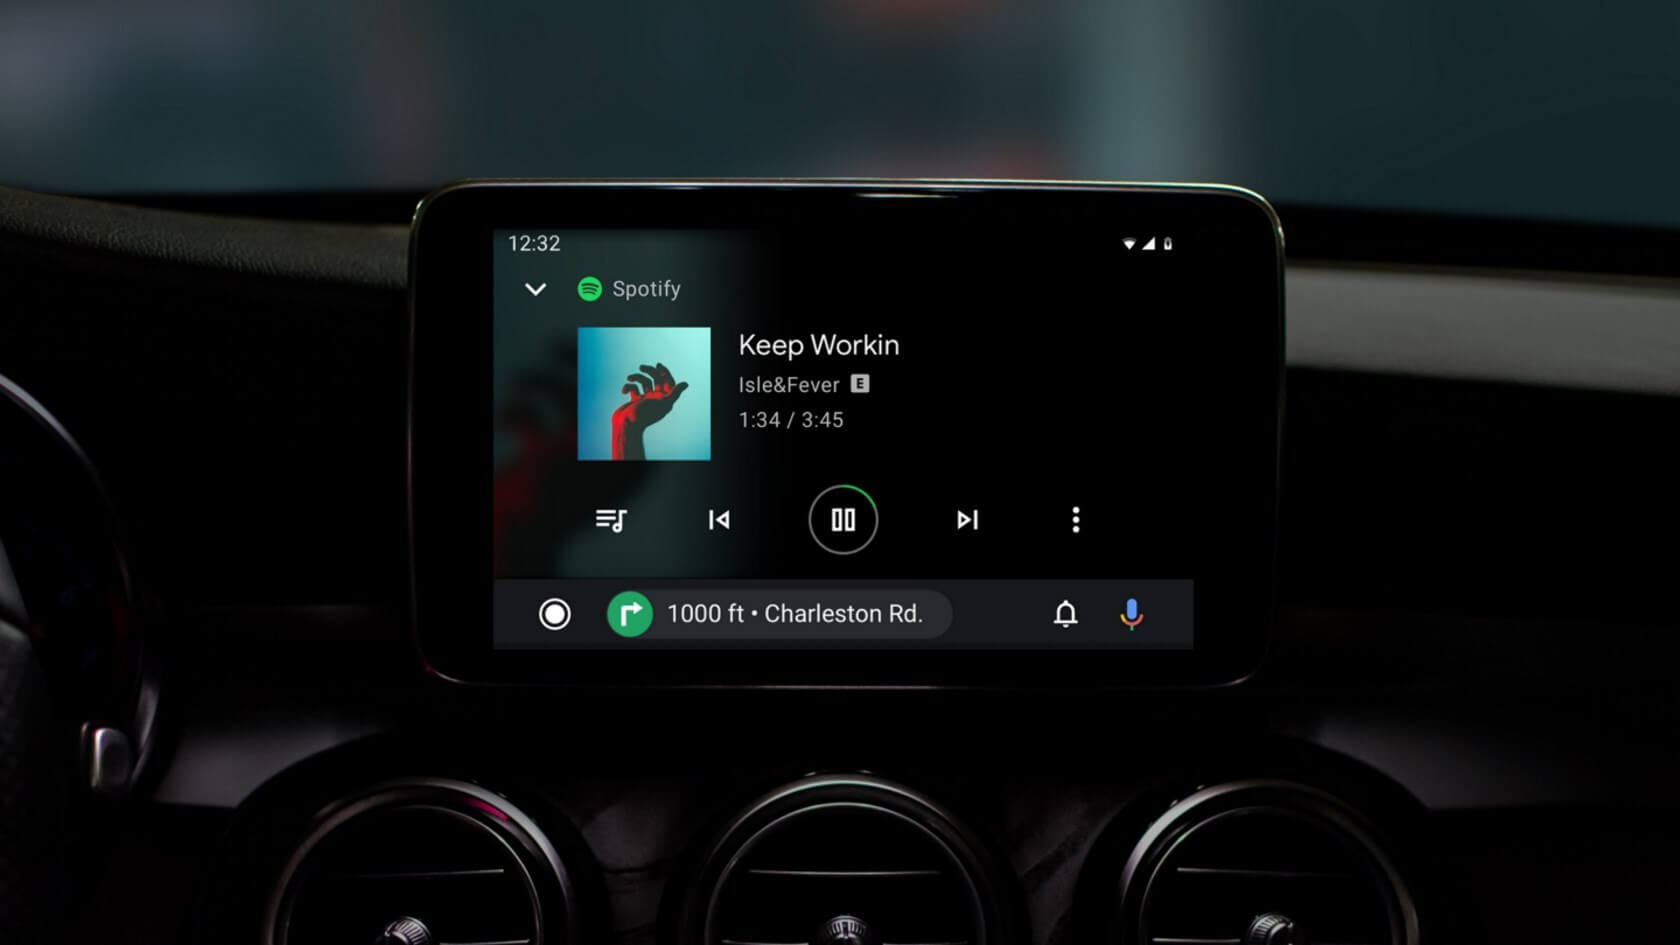 Android Auto's major overhaul rolls out today, bringing a darker interface, better multitasking, and more